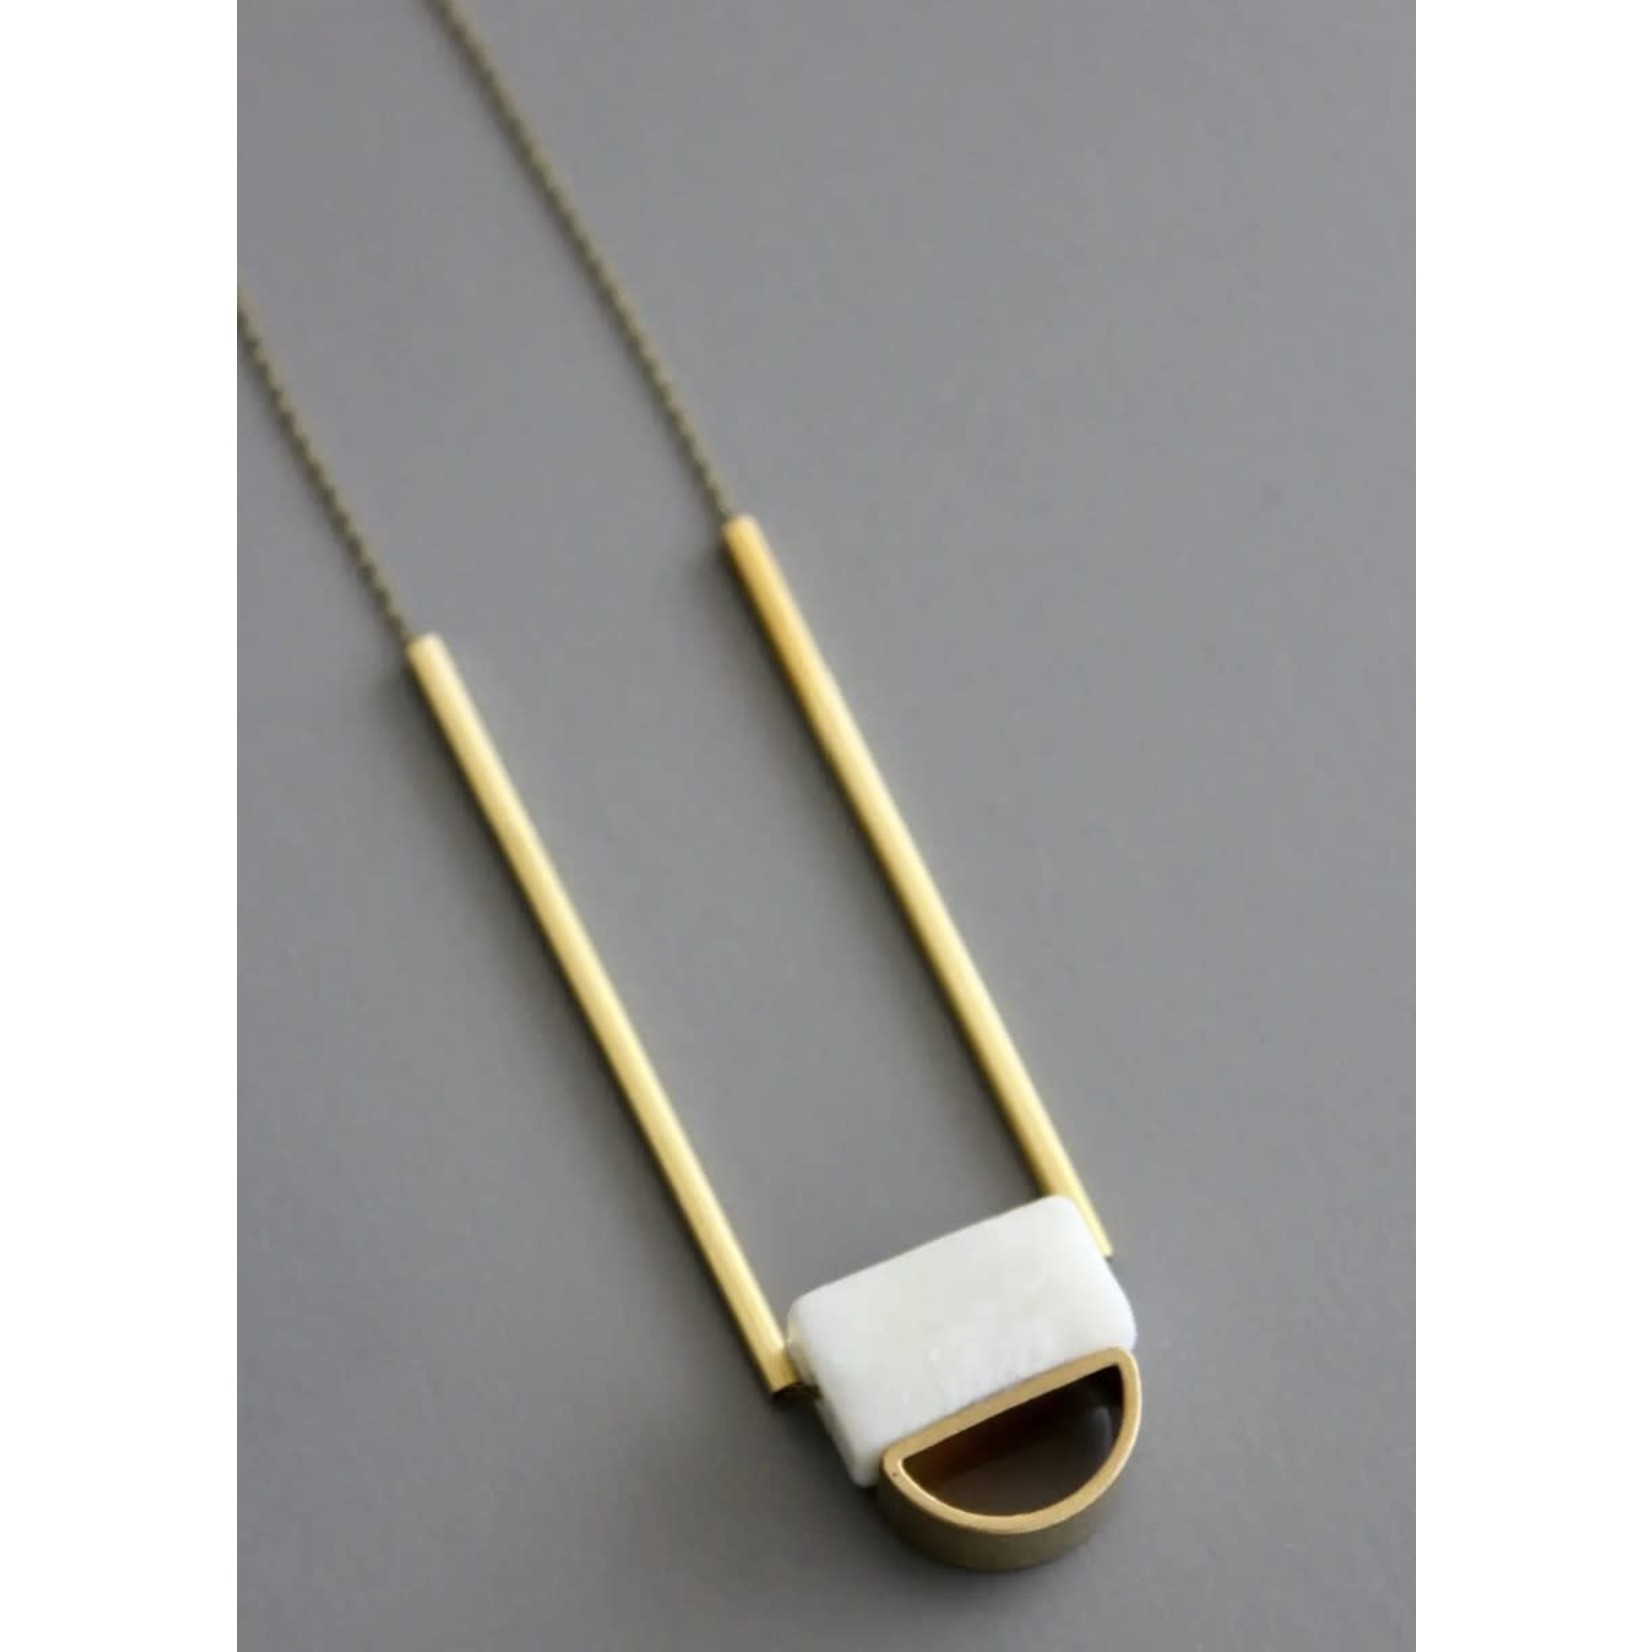 DAVID AUBREY SMALL WHITE AGATE AND BRASS PENDANT CHAIN NECKLACE